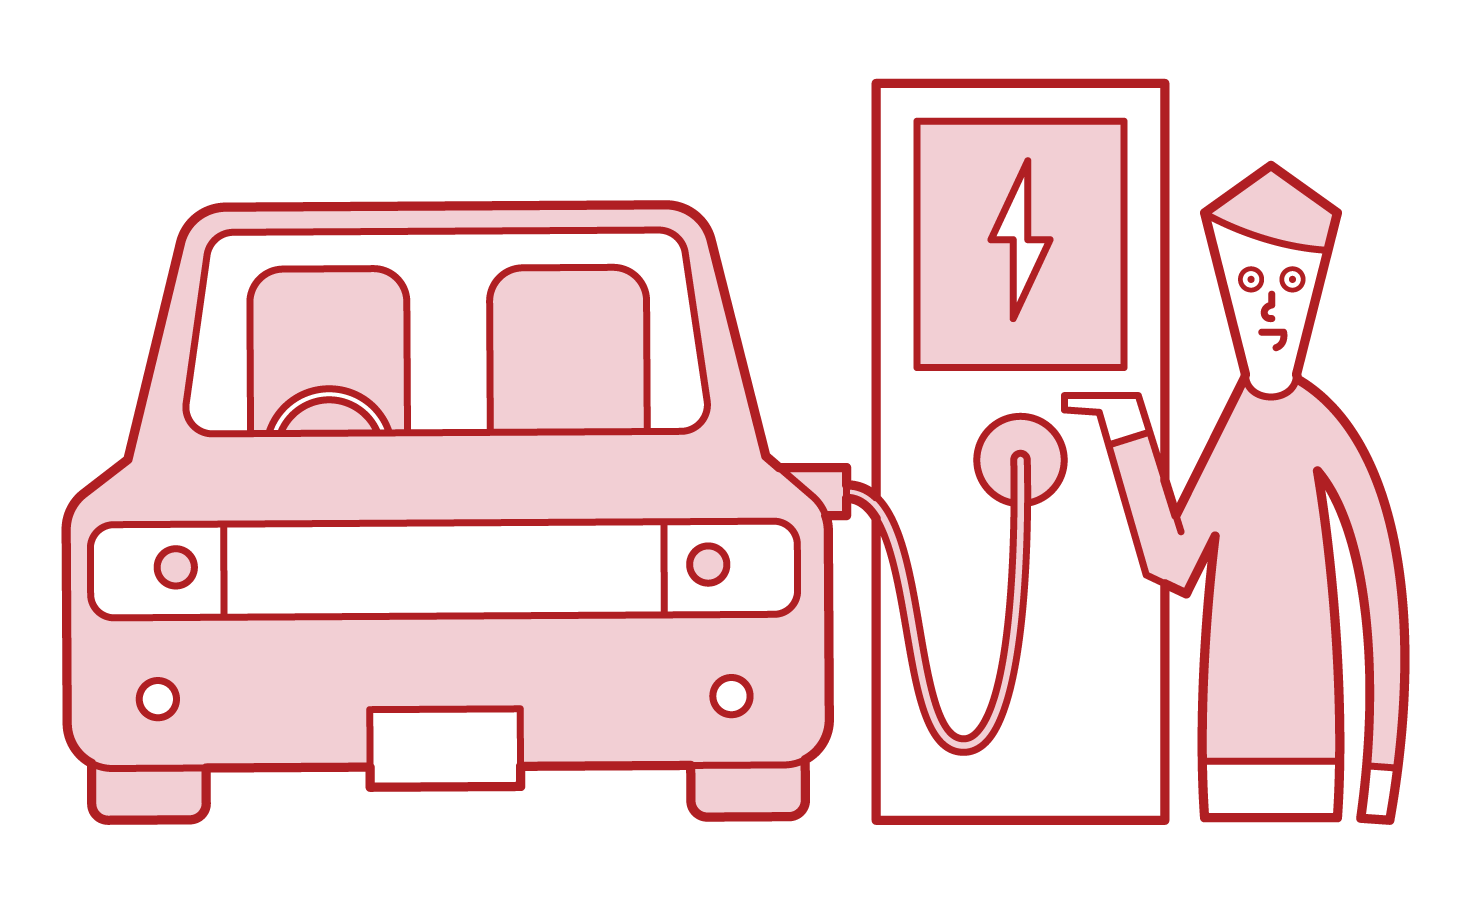 Illustration of a man charging an electric car